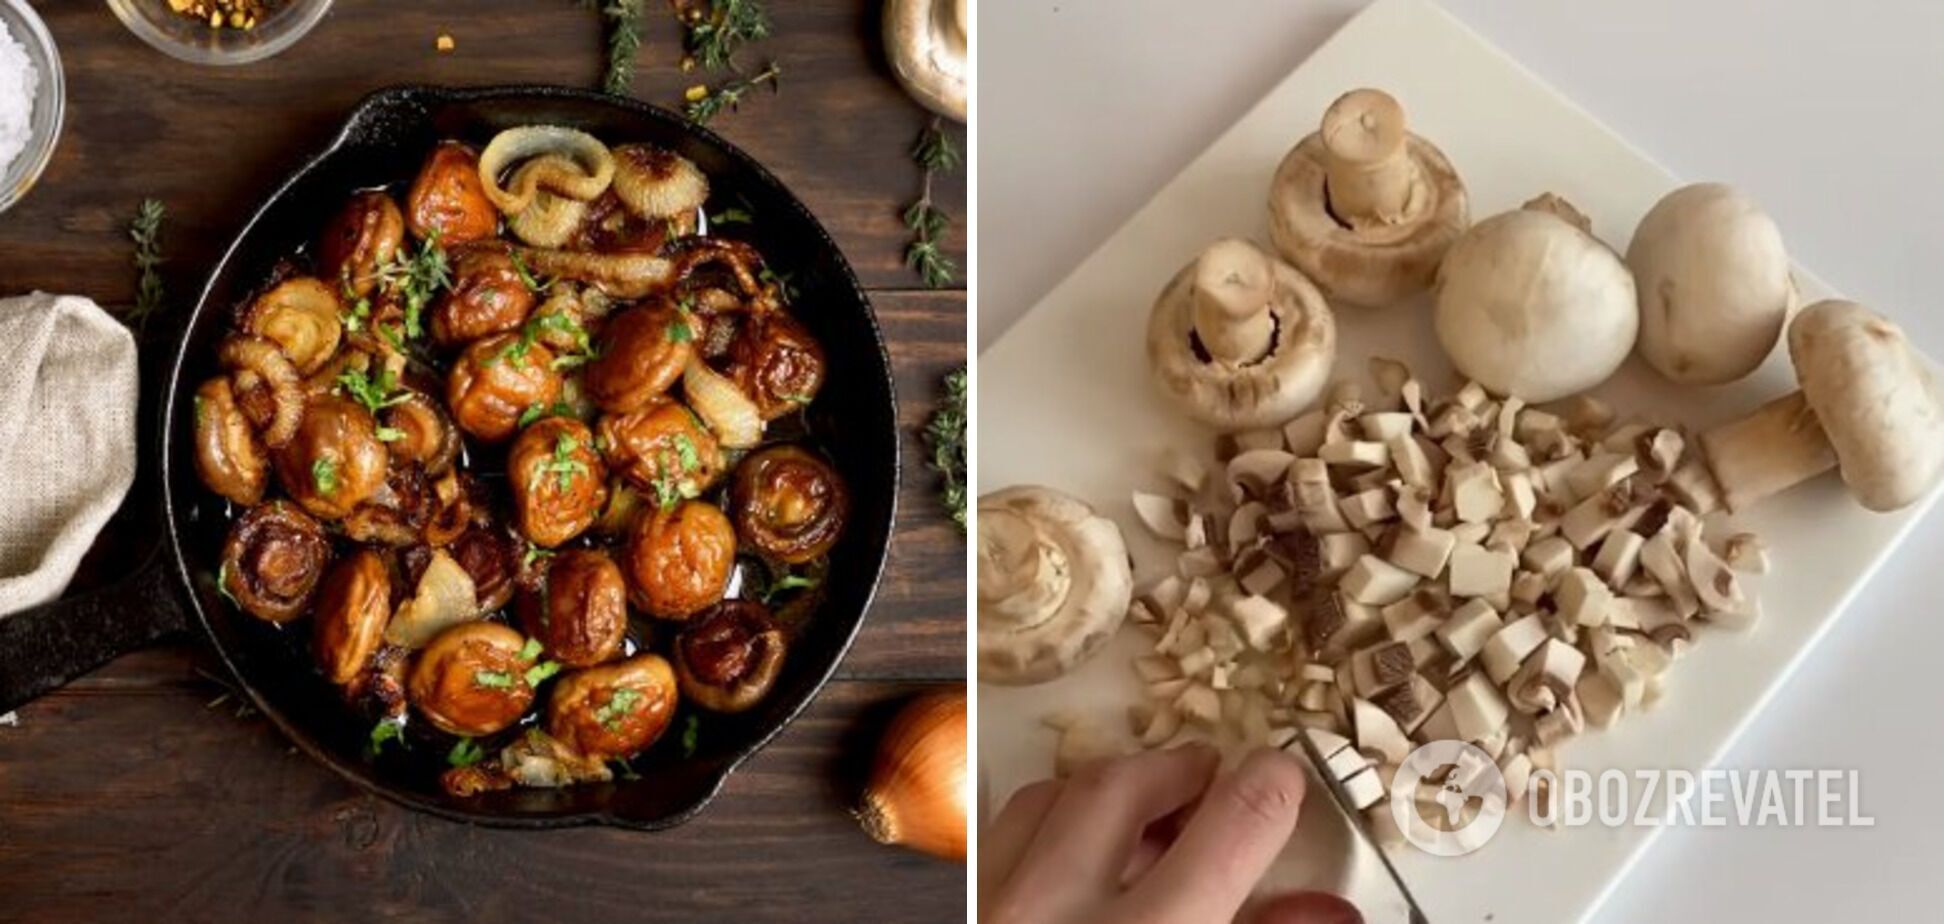 Mushrooms for the pie